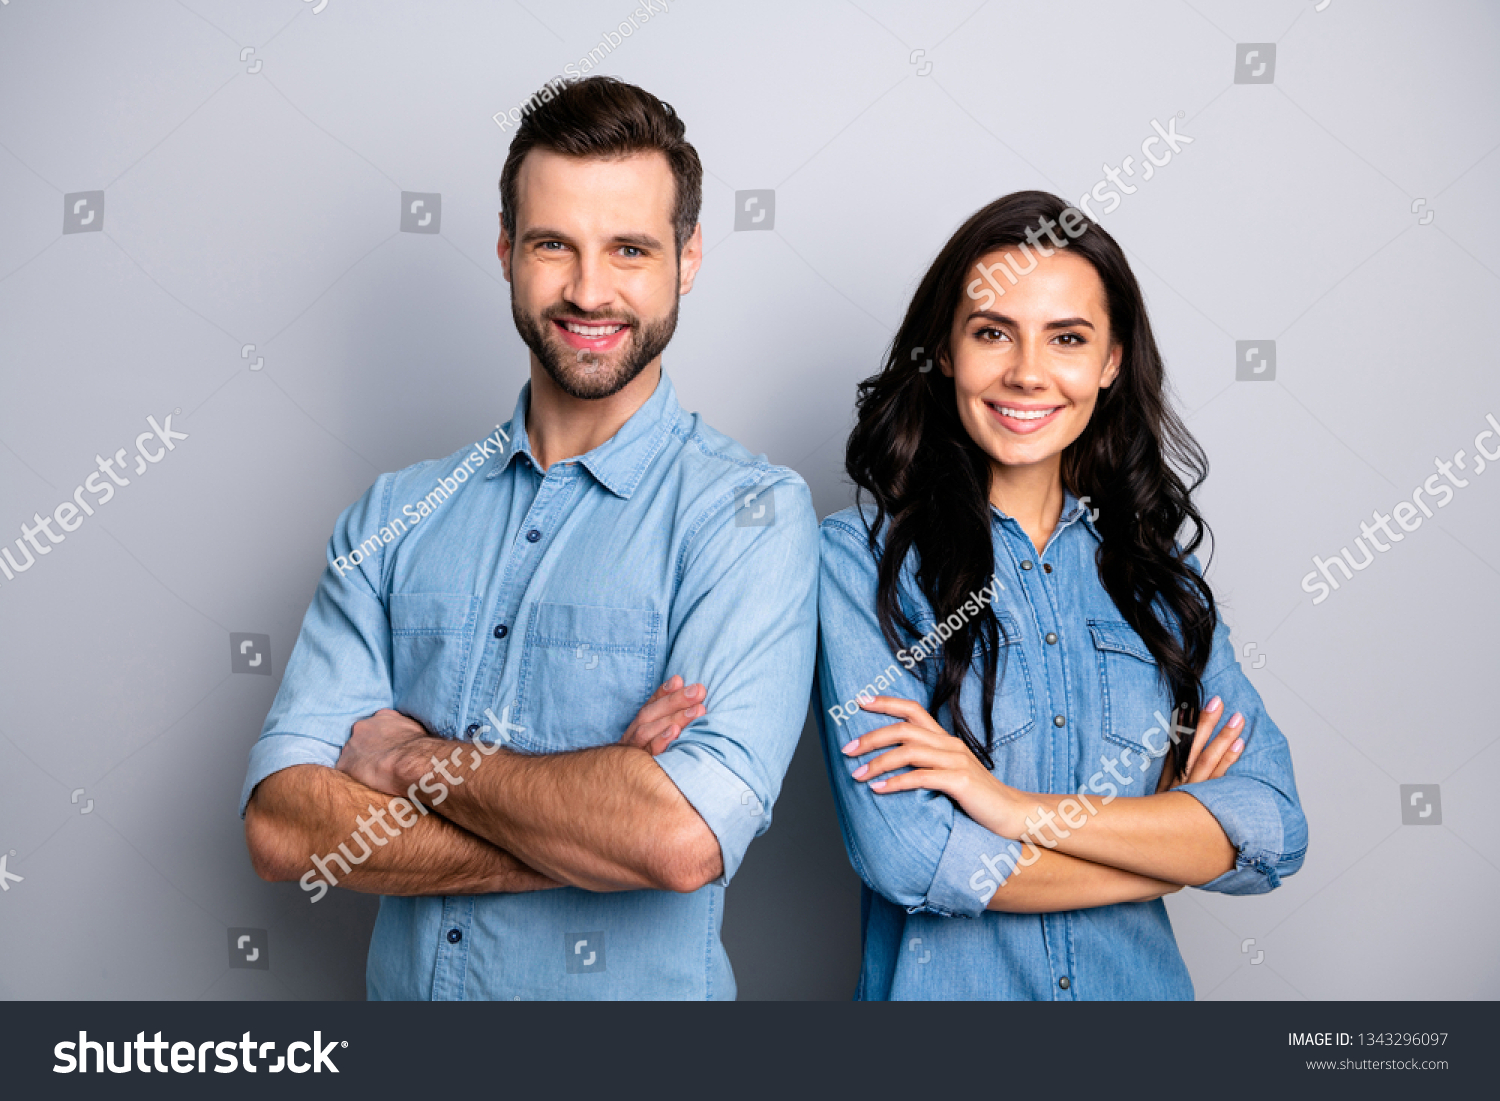 Portrait of charming charismatic freelancers entrepreneurs ready to solve business work problems take decisions. Wearing blue denim jackets isolated on ashy-gray background #1343296097